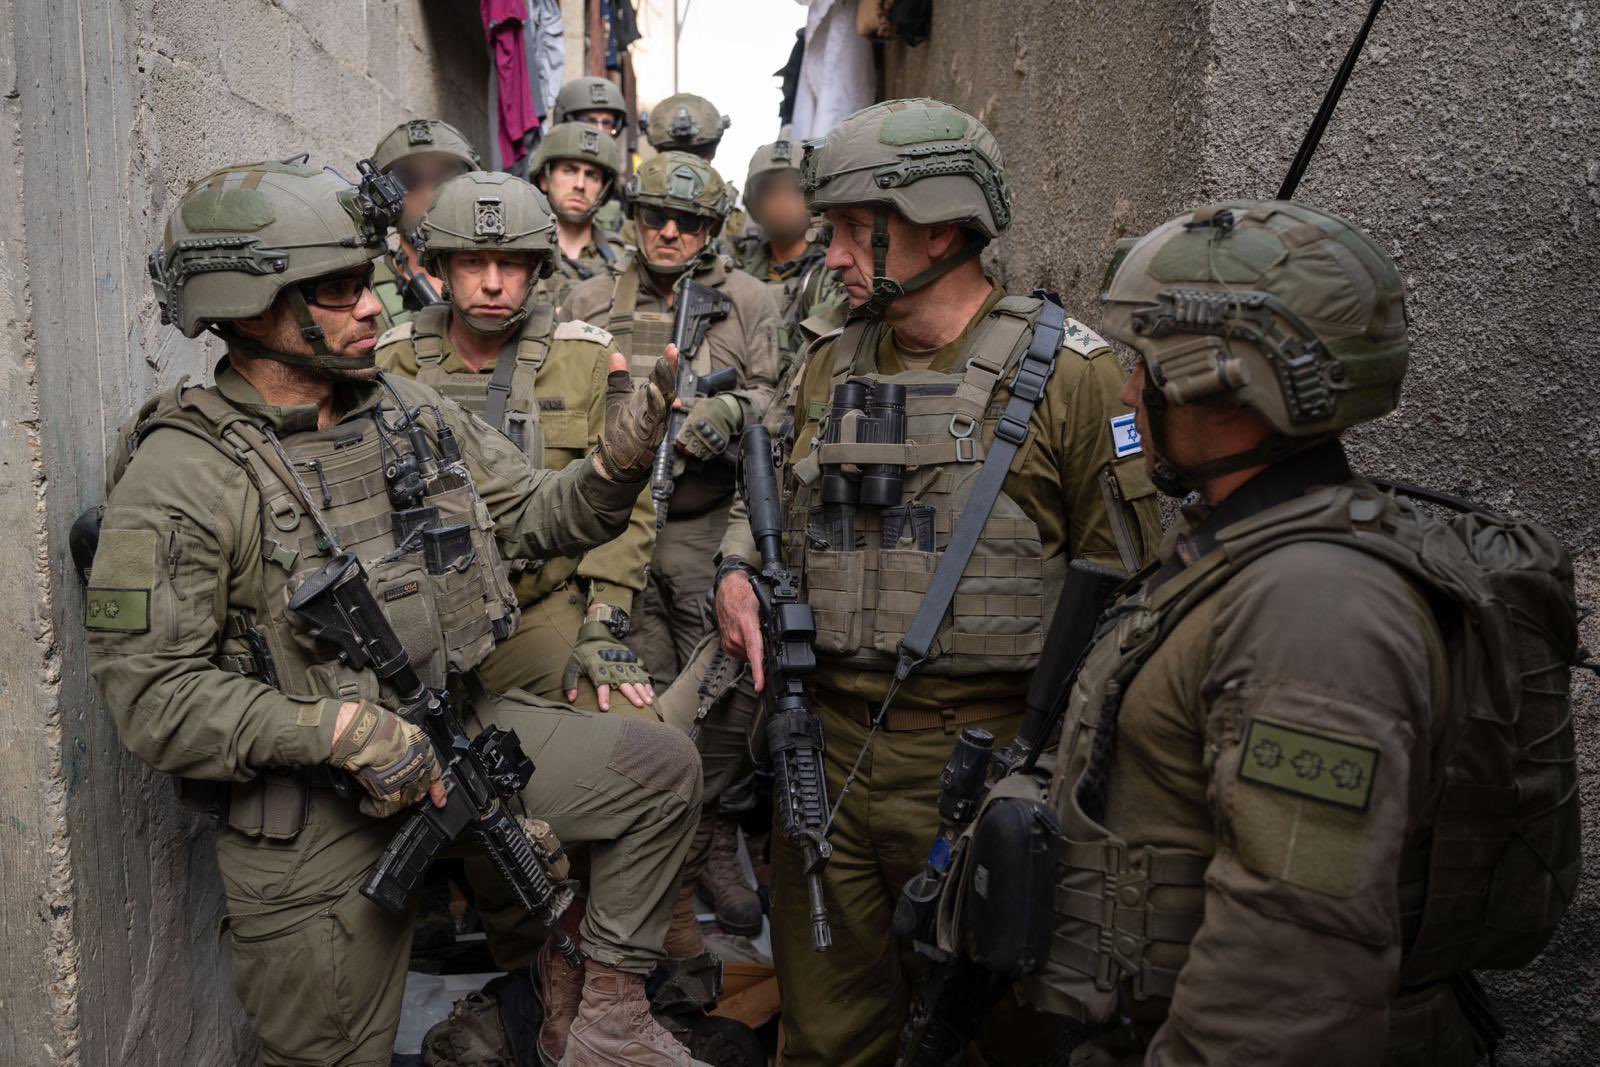 Israel Forces personnel in a previous operation.